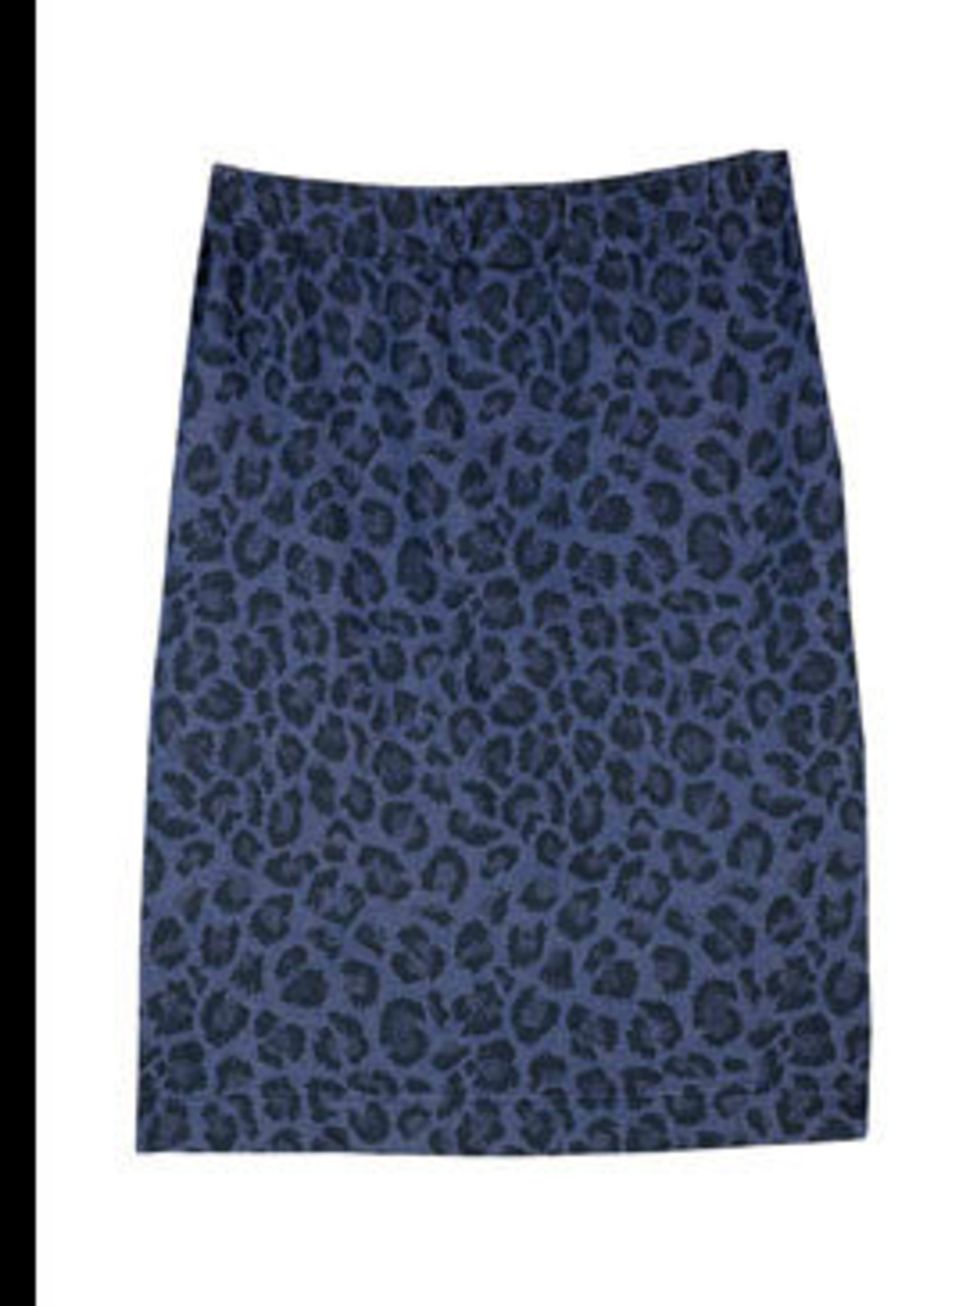 <p>Skirt, £170 by Peter Jensen at <a href="http://www.urbanoutfitters.co.uk/page/home">Urban Outfitters</a></p>